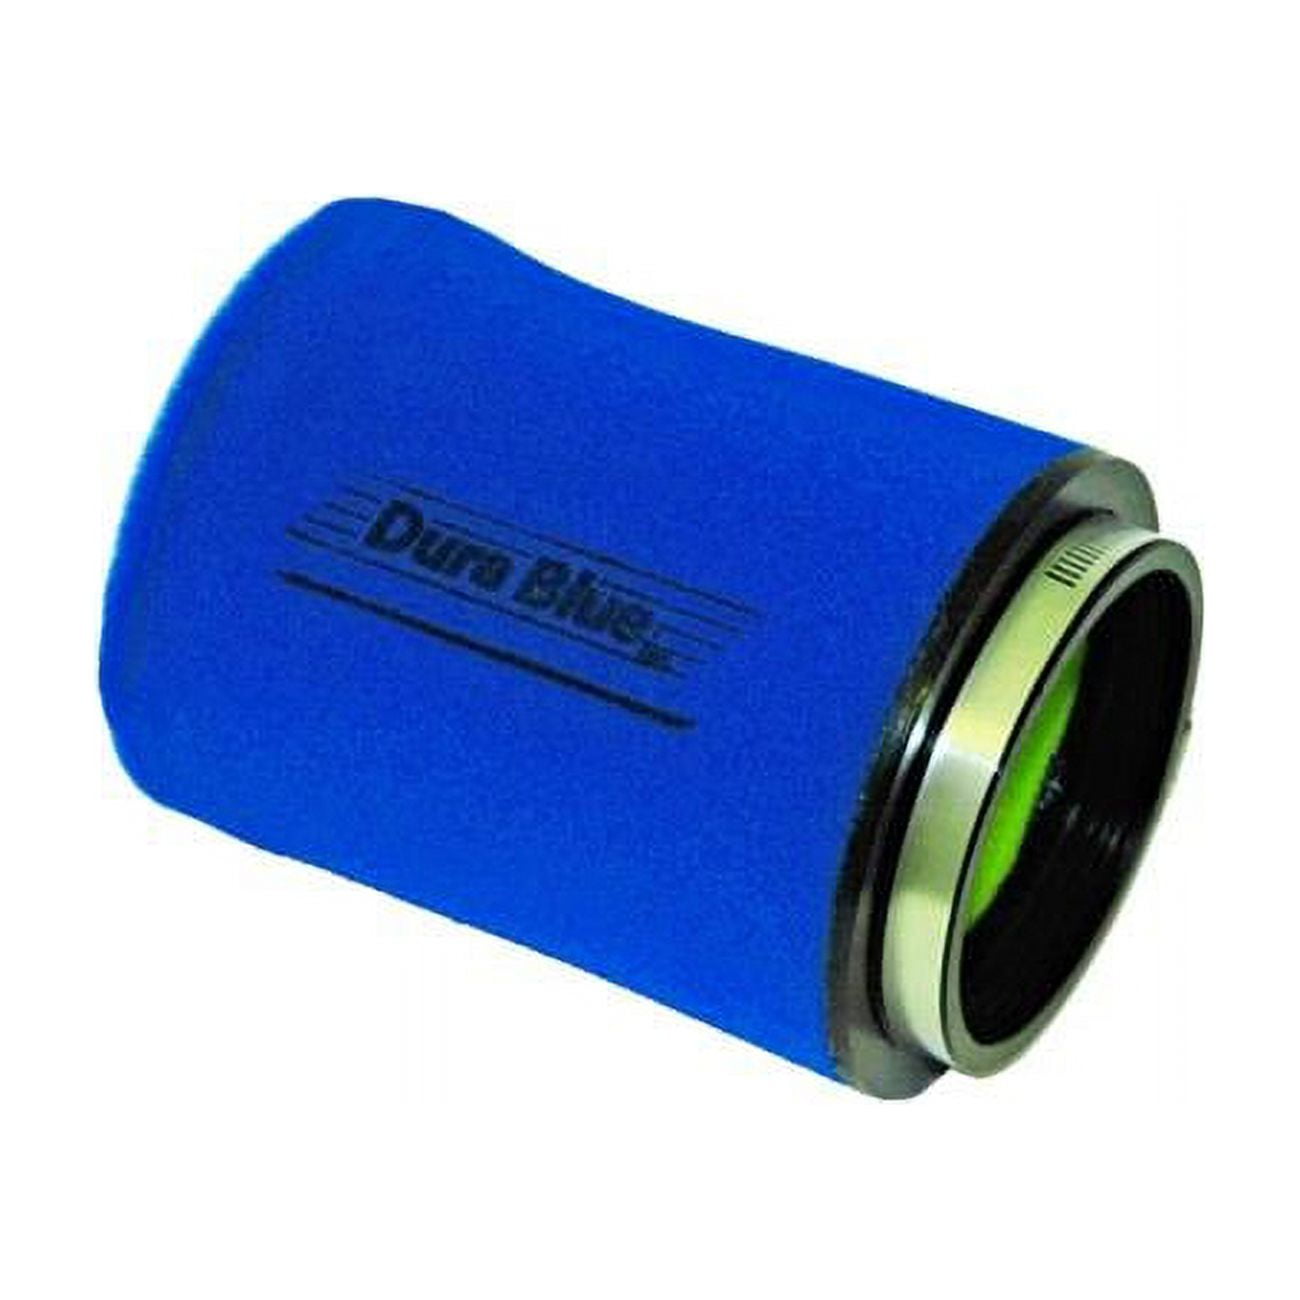 Picture of Durablue 1995 Air Filter - Power Yamaha YFZ450 2004-2009 & 12-15 - Replacement Filter Only 1995k Kit